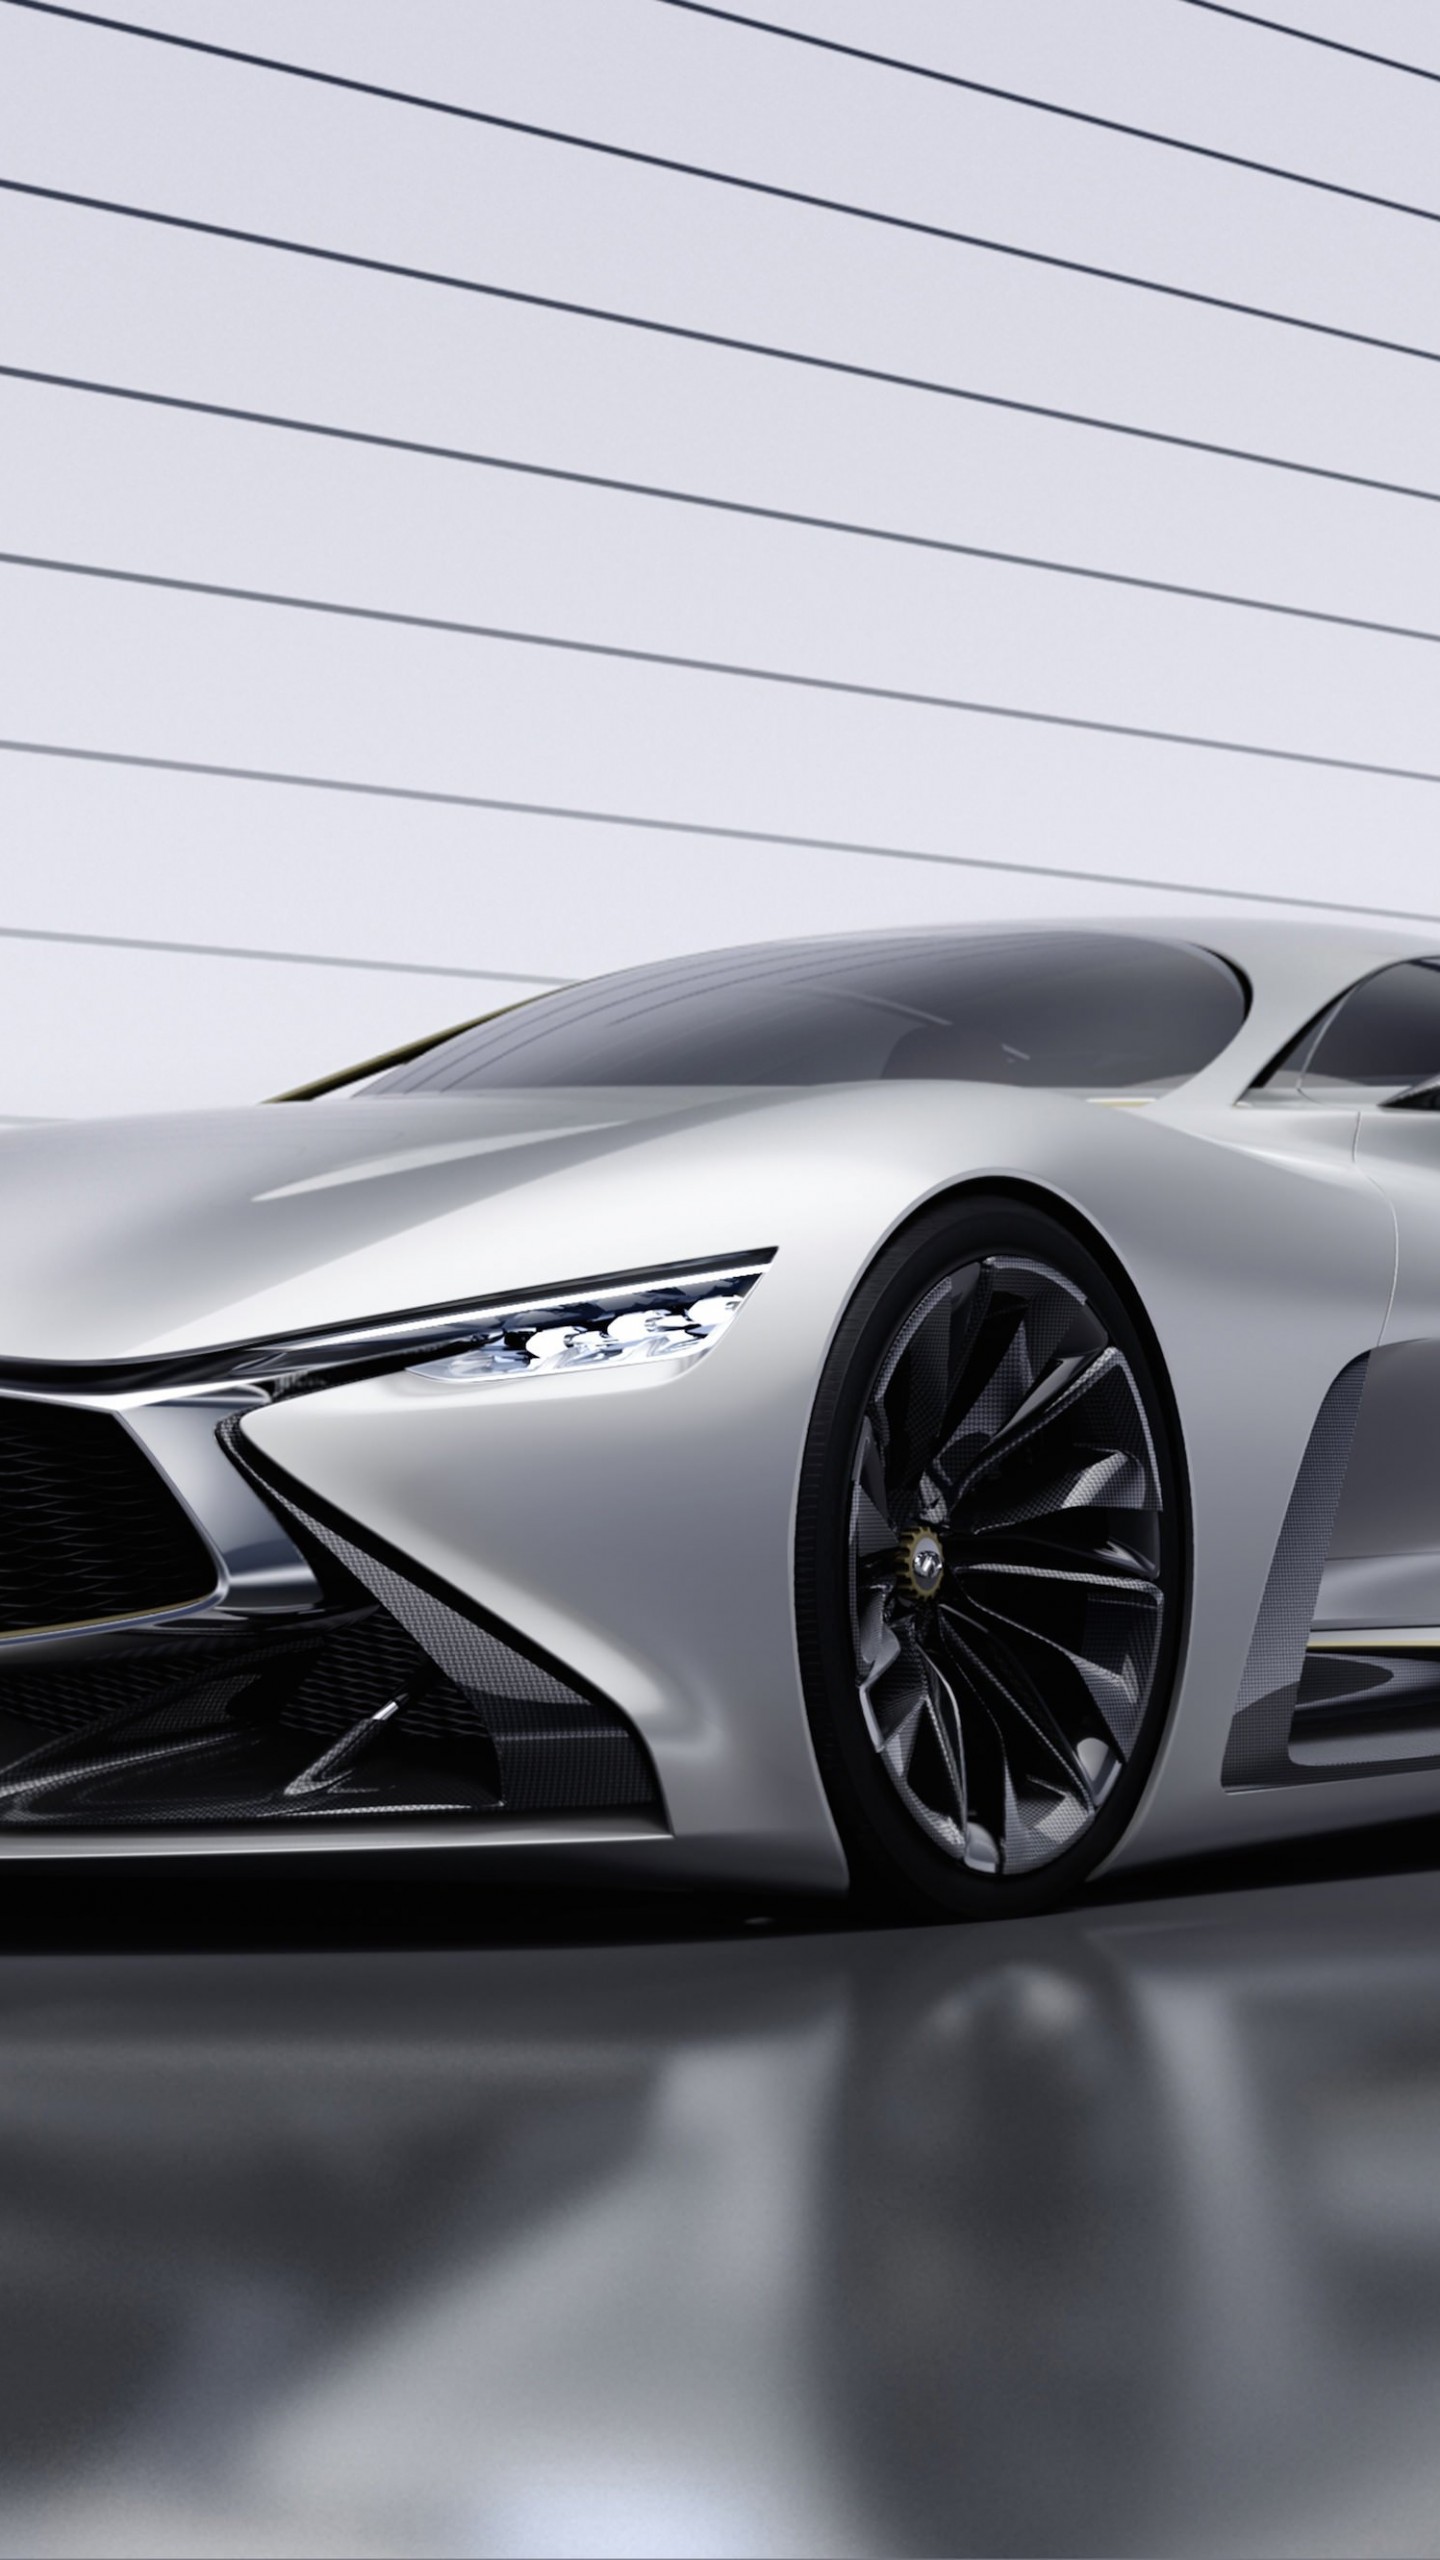 Infiniti Vision GT Concept Wallpaper for SAMSUNG Galaxy Note 4